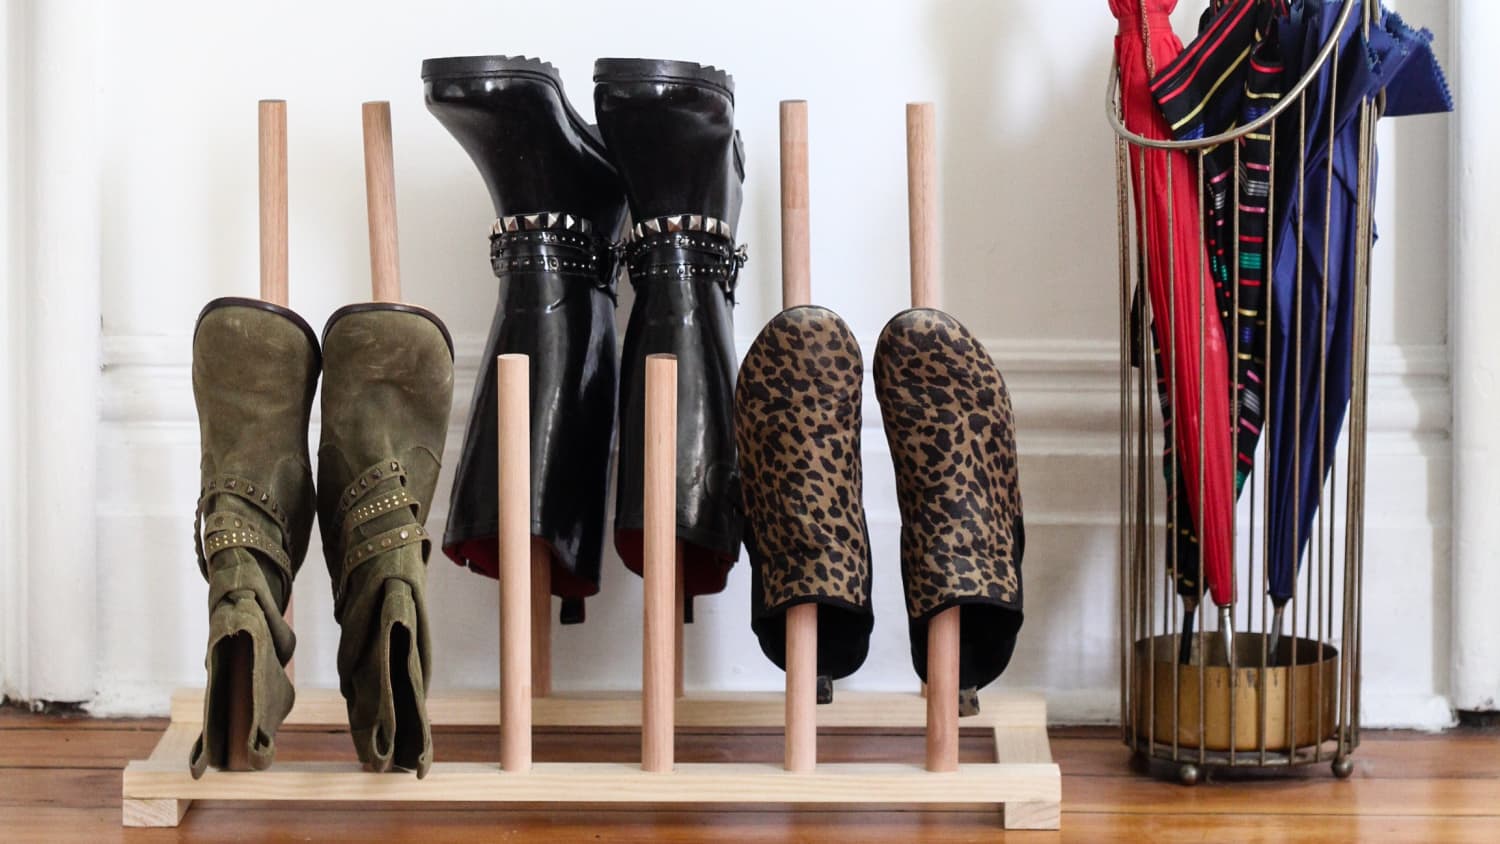 Condo Blues: How to Make an Easy DIY Floor To Ceiling Shoe Rack